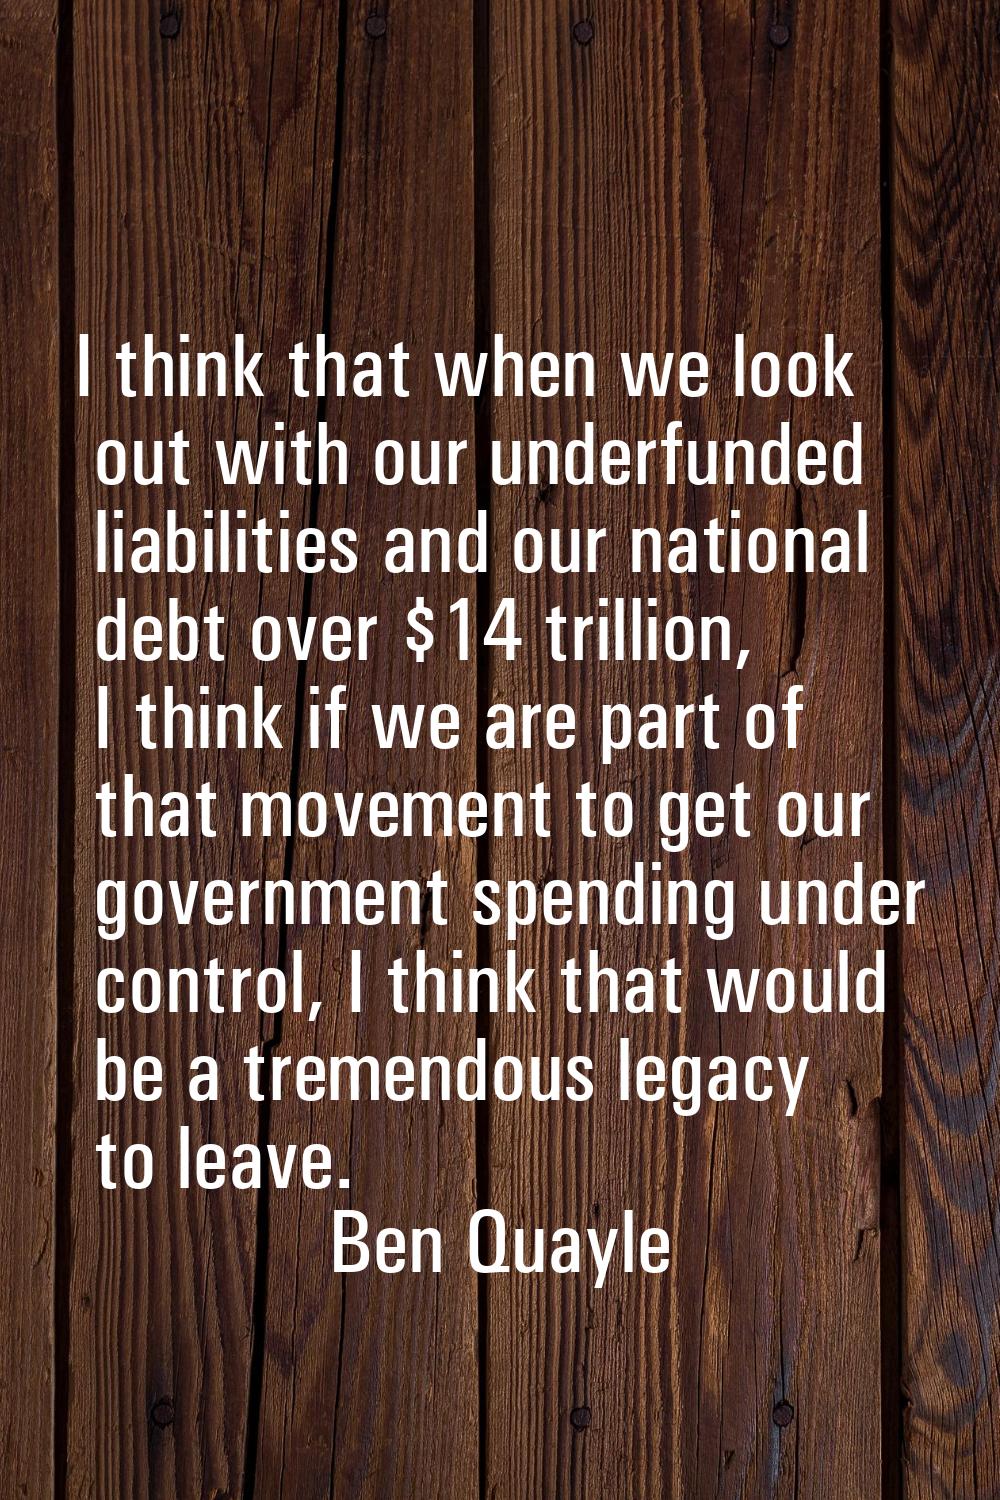 I think that when we look out with our underfunded liabilities and our national debt over $14 trill